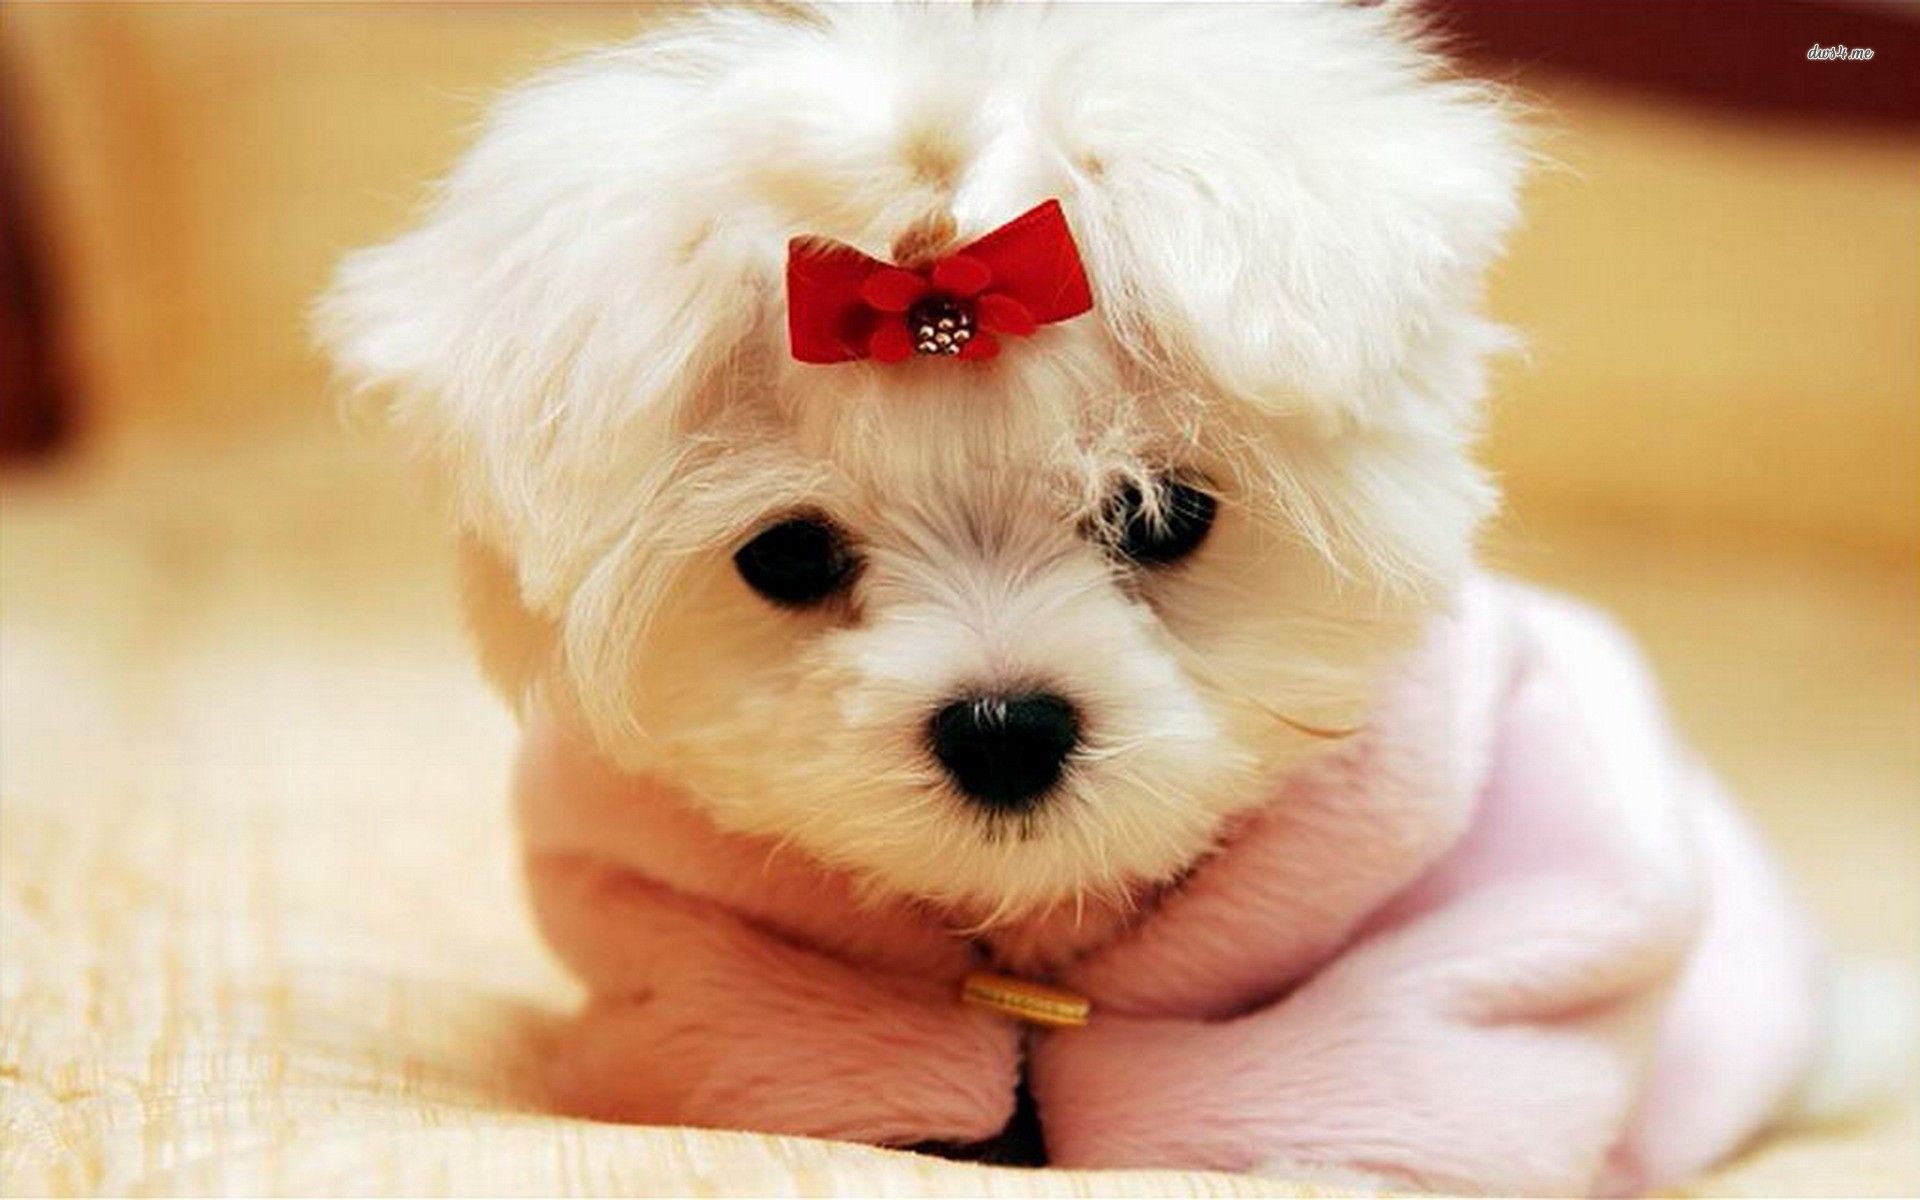 Cute Dogs And Puppies Wallpaper Wallpapers